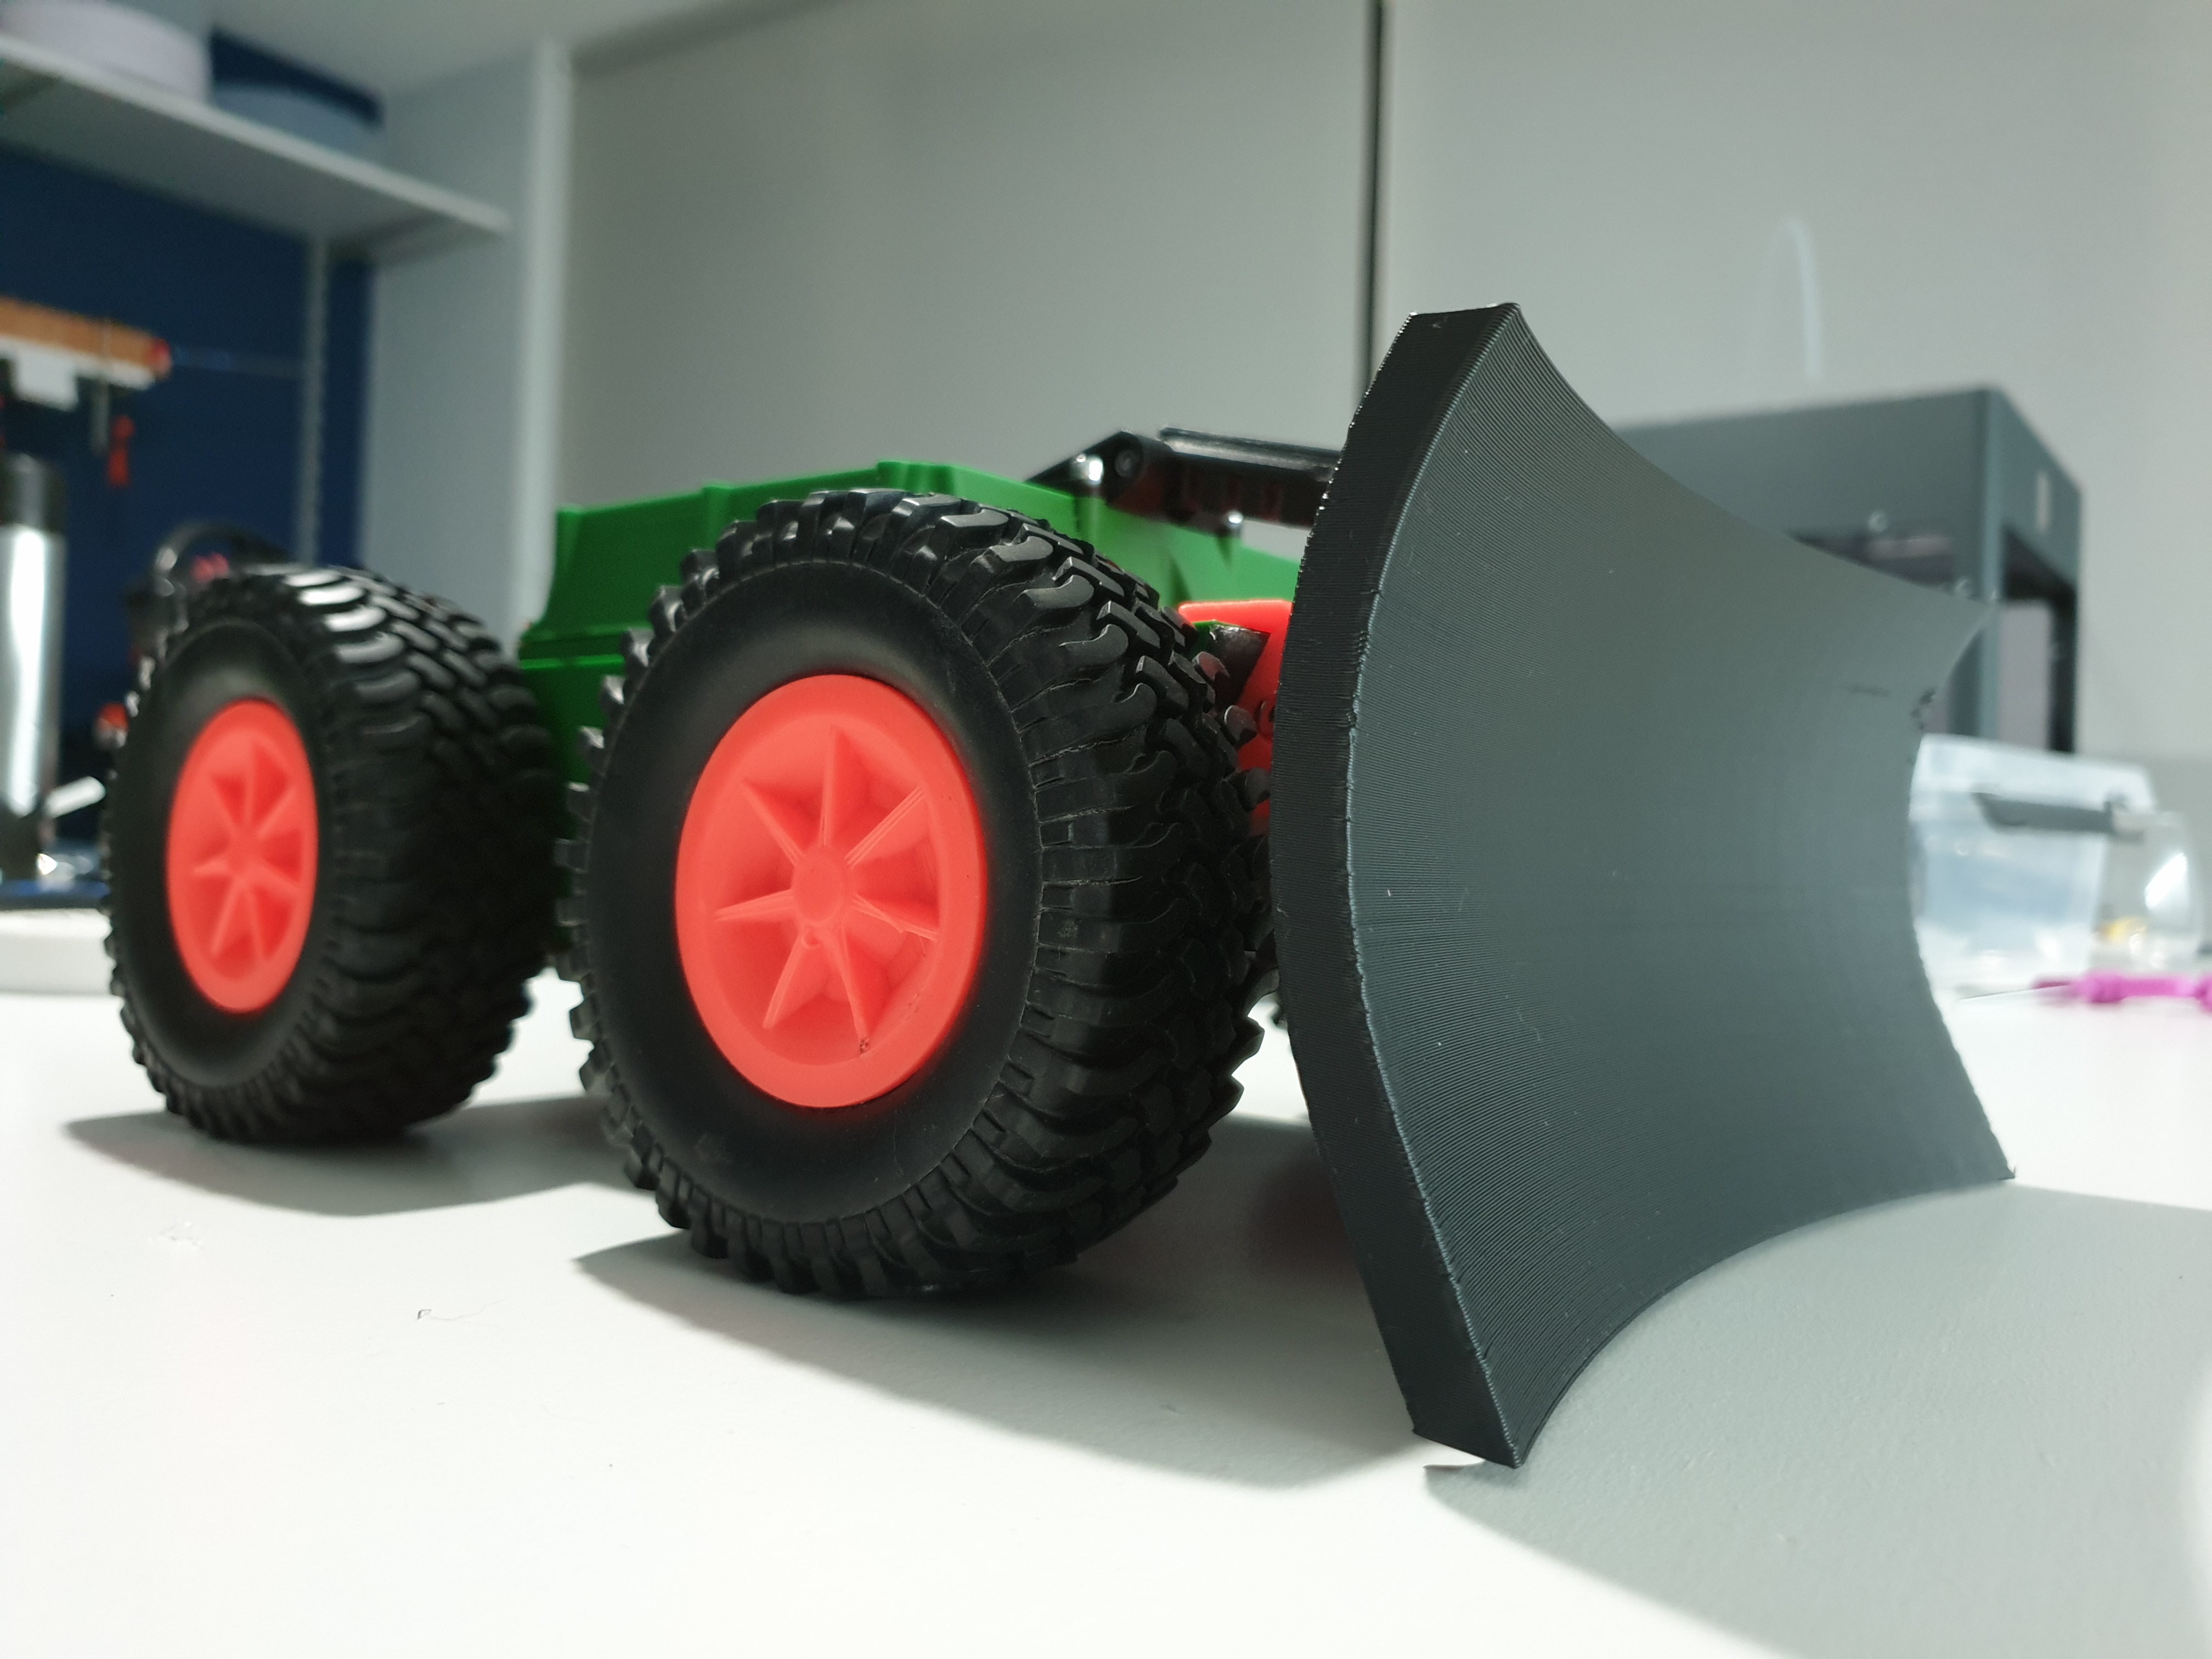 Mini Utility Crawler - RC car base for different projects